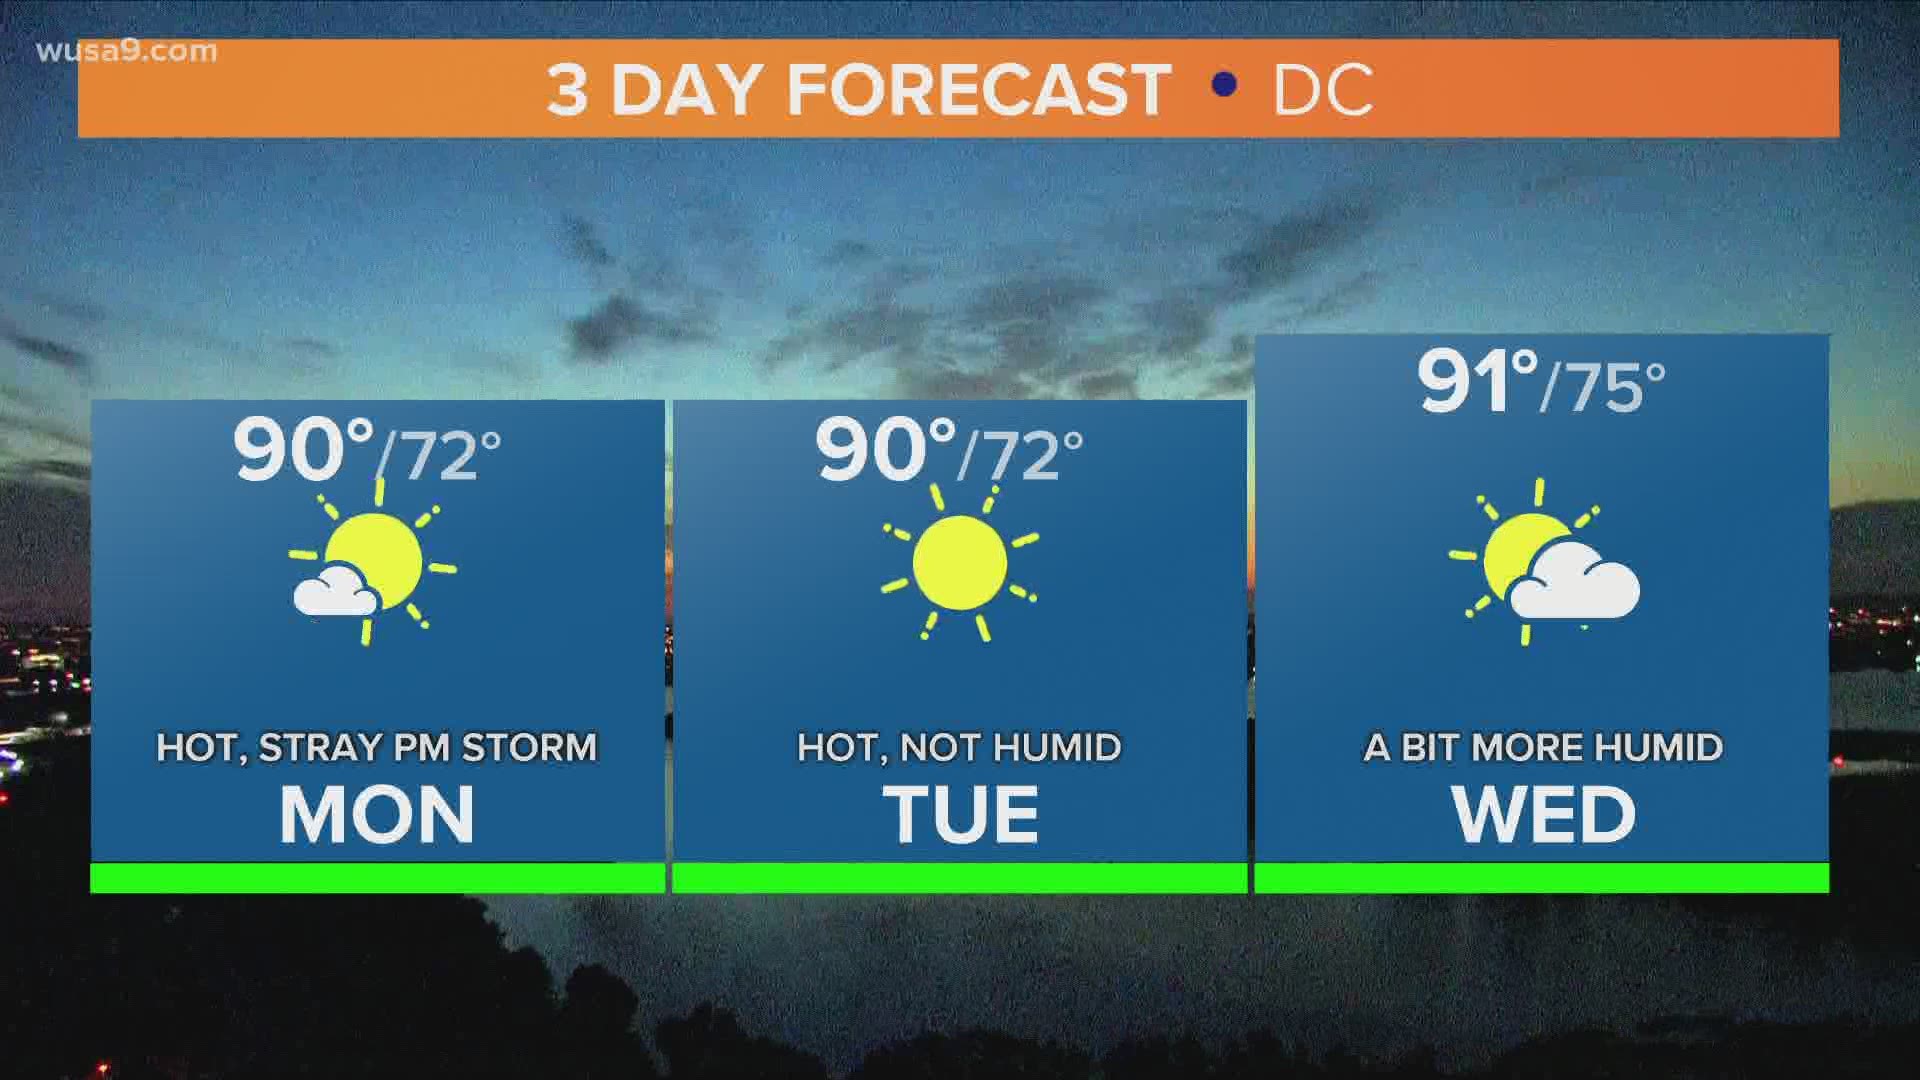 Temperatures expected to hit the 90 degree mark again on Monday.